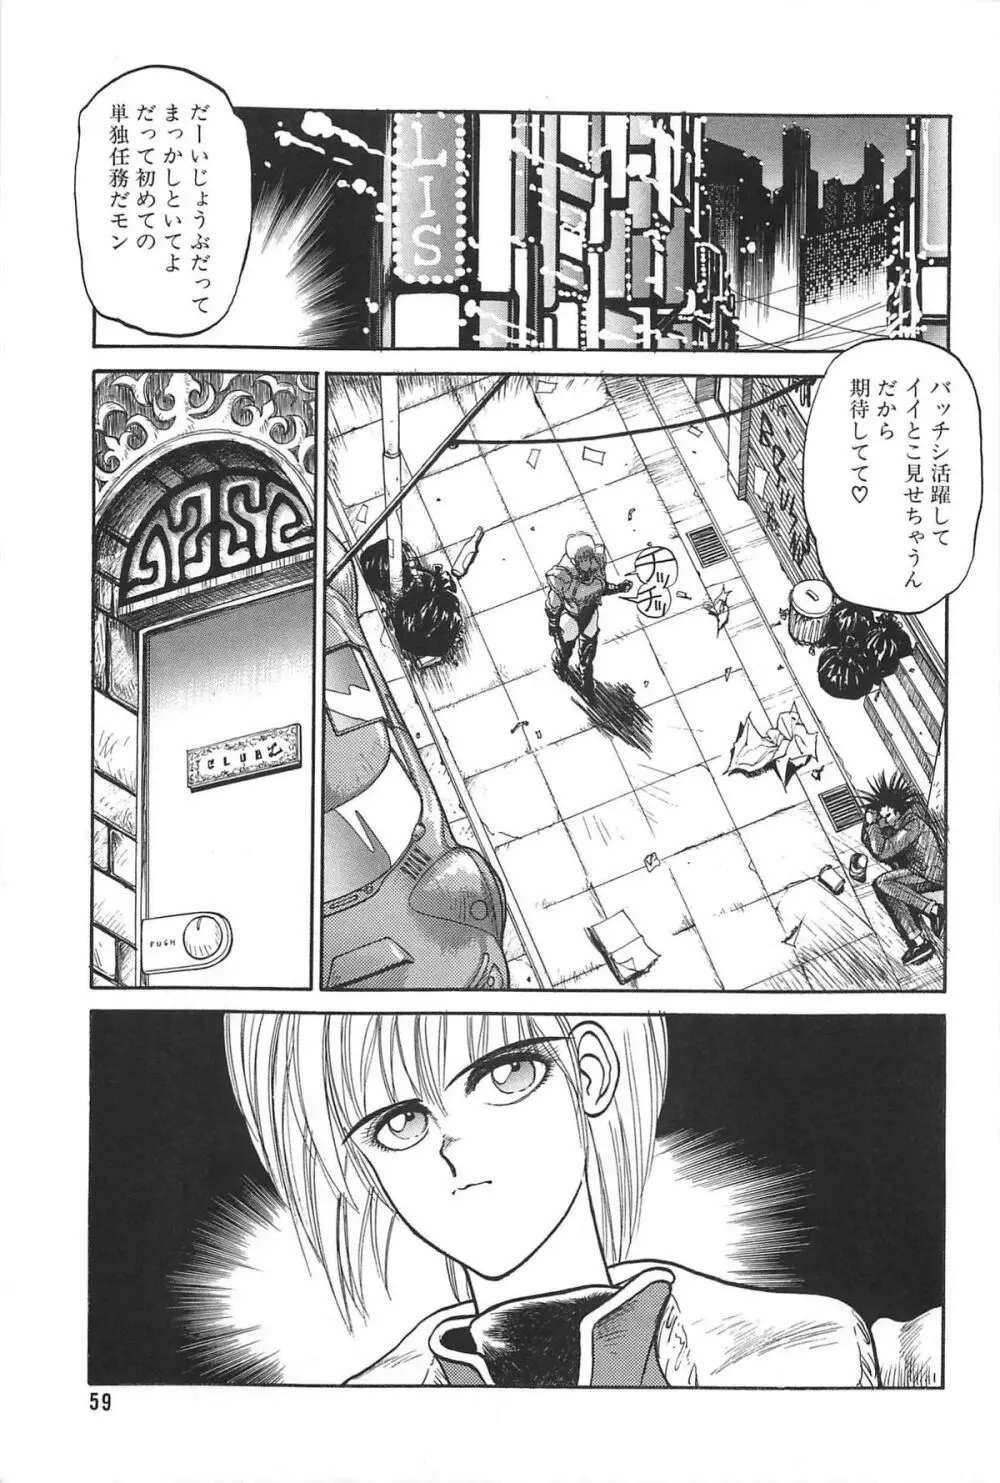 LOVE ME 1995 Page.61